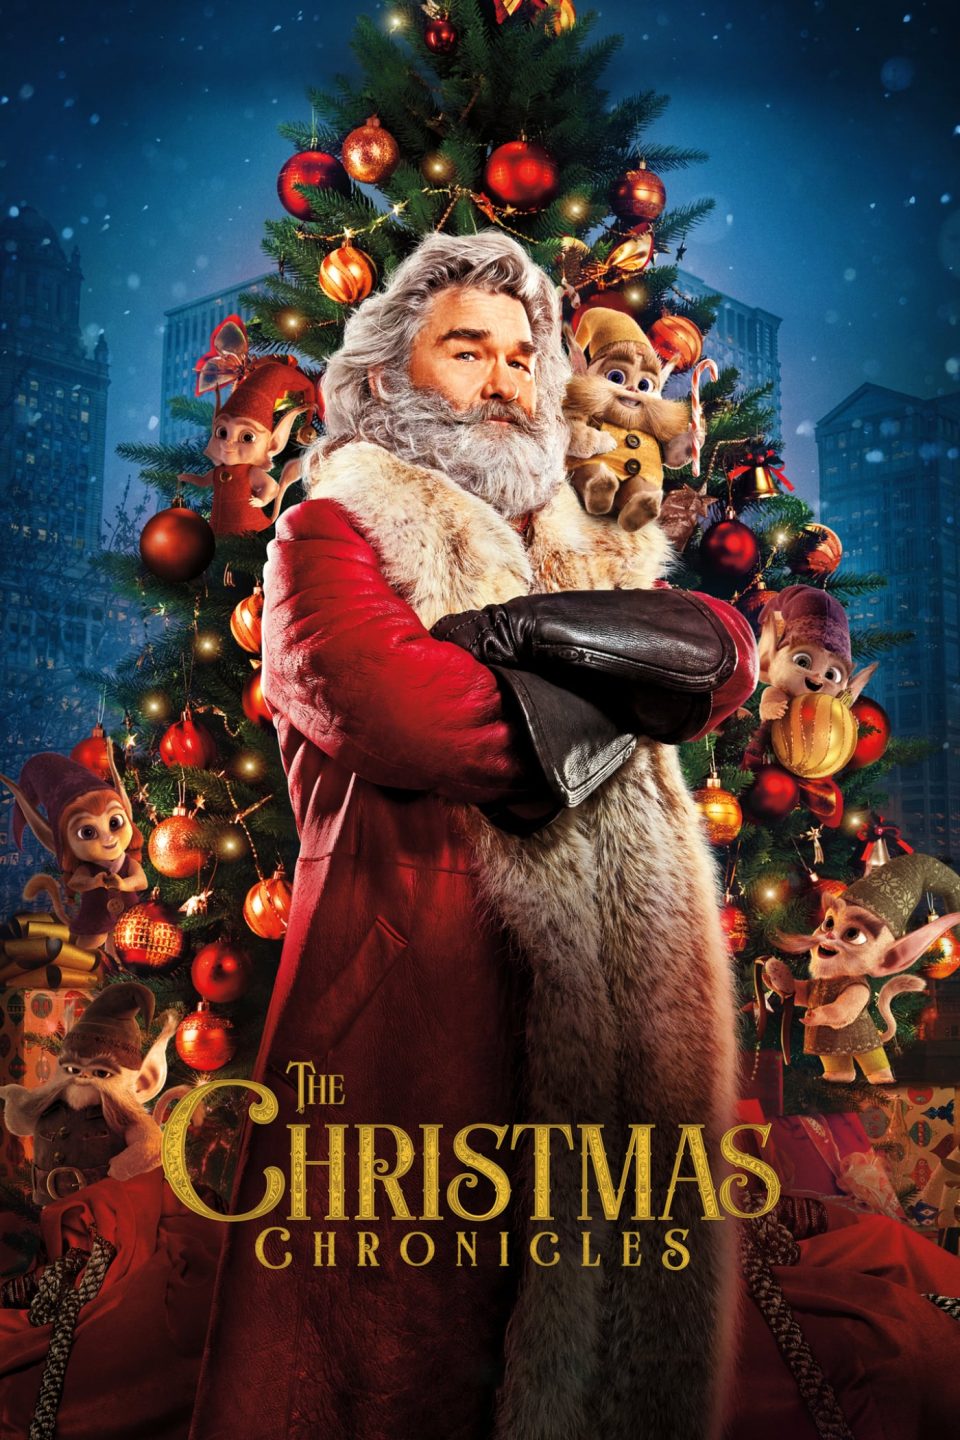 Poster for the movie "The Christmas Chronicles"